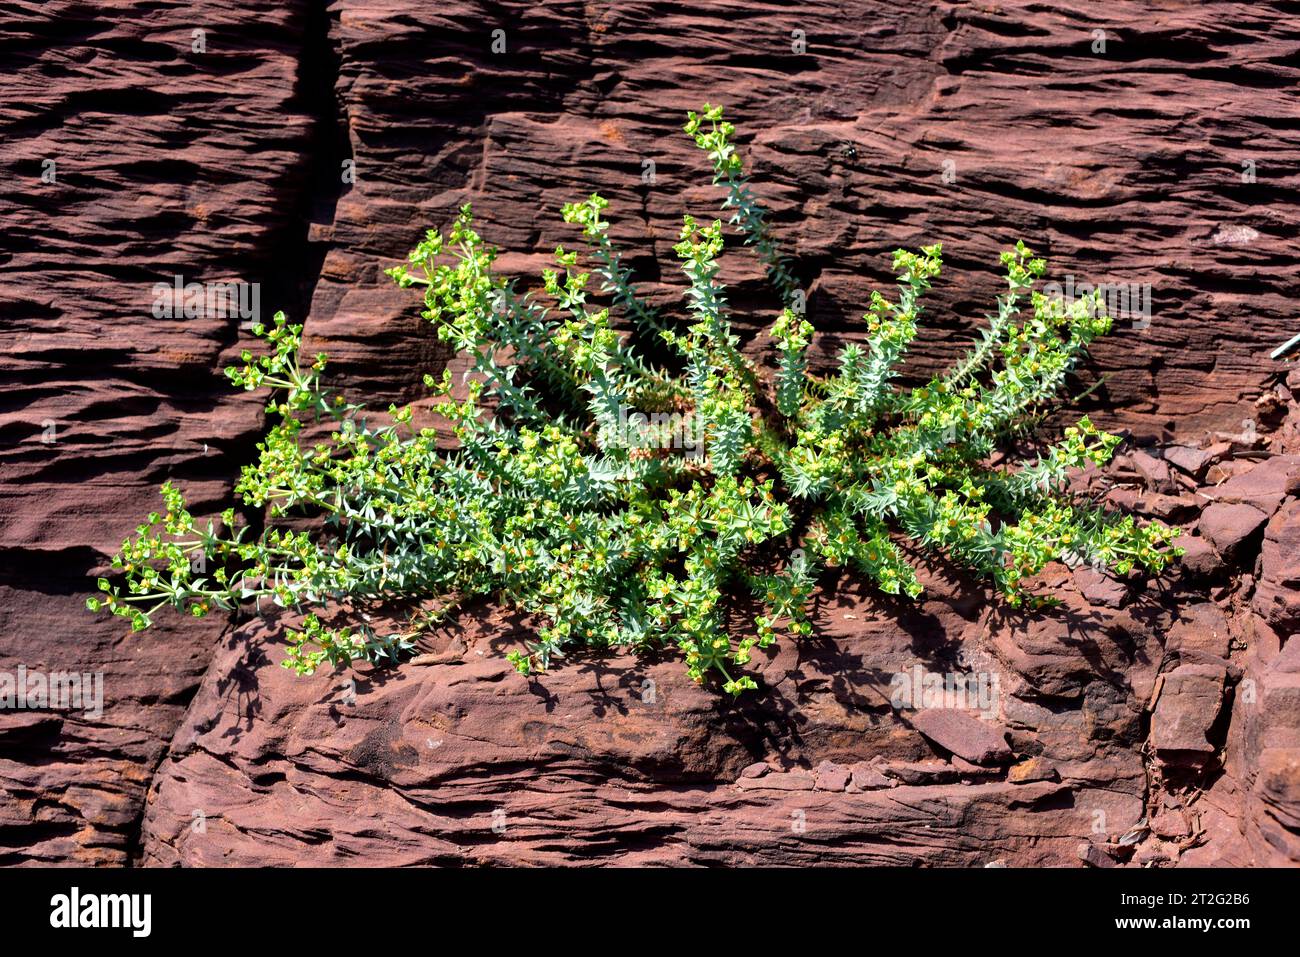 Euphorbia pithyusa is a perennial plant native to Balearic Islands, Corsica, Sardinia, Sicily and southern France coasts. This photo was taken in Meno Stock Photo